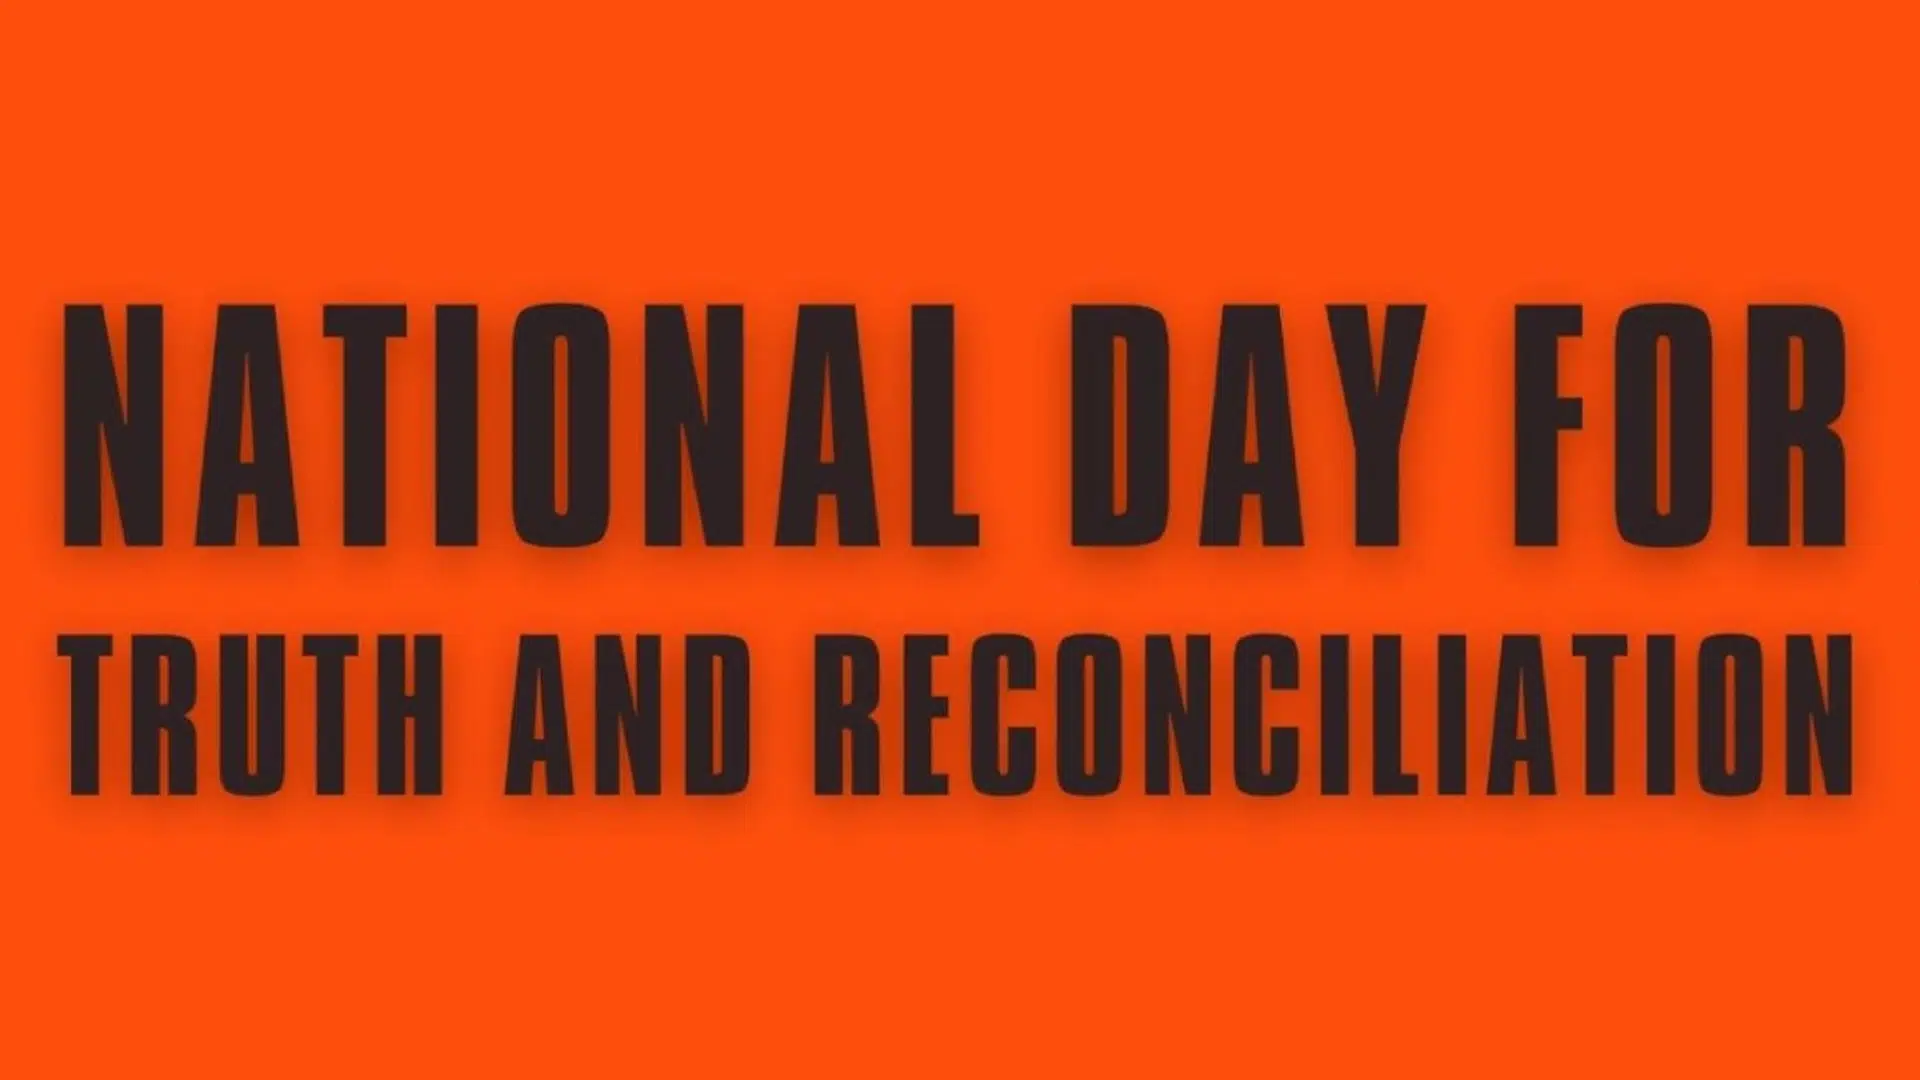 National Day For Truth And Reconciliation